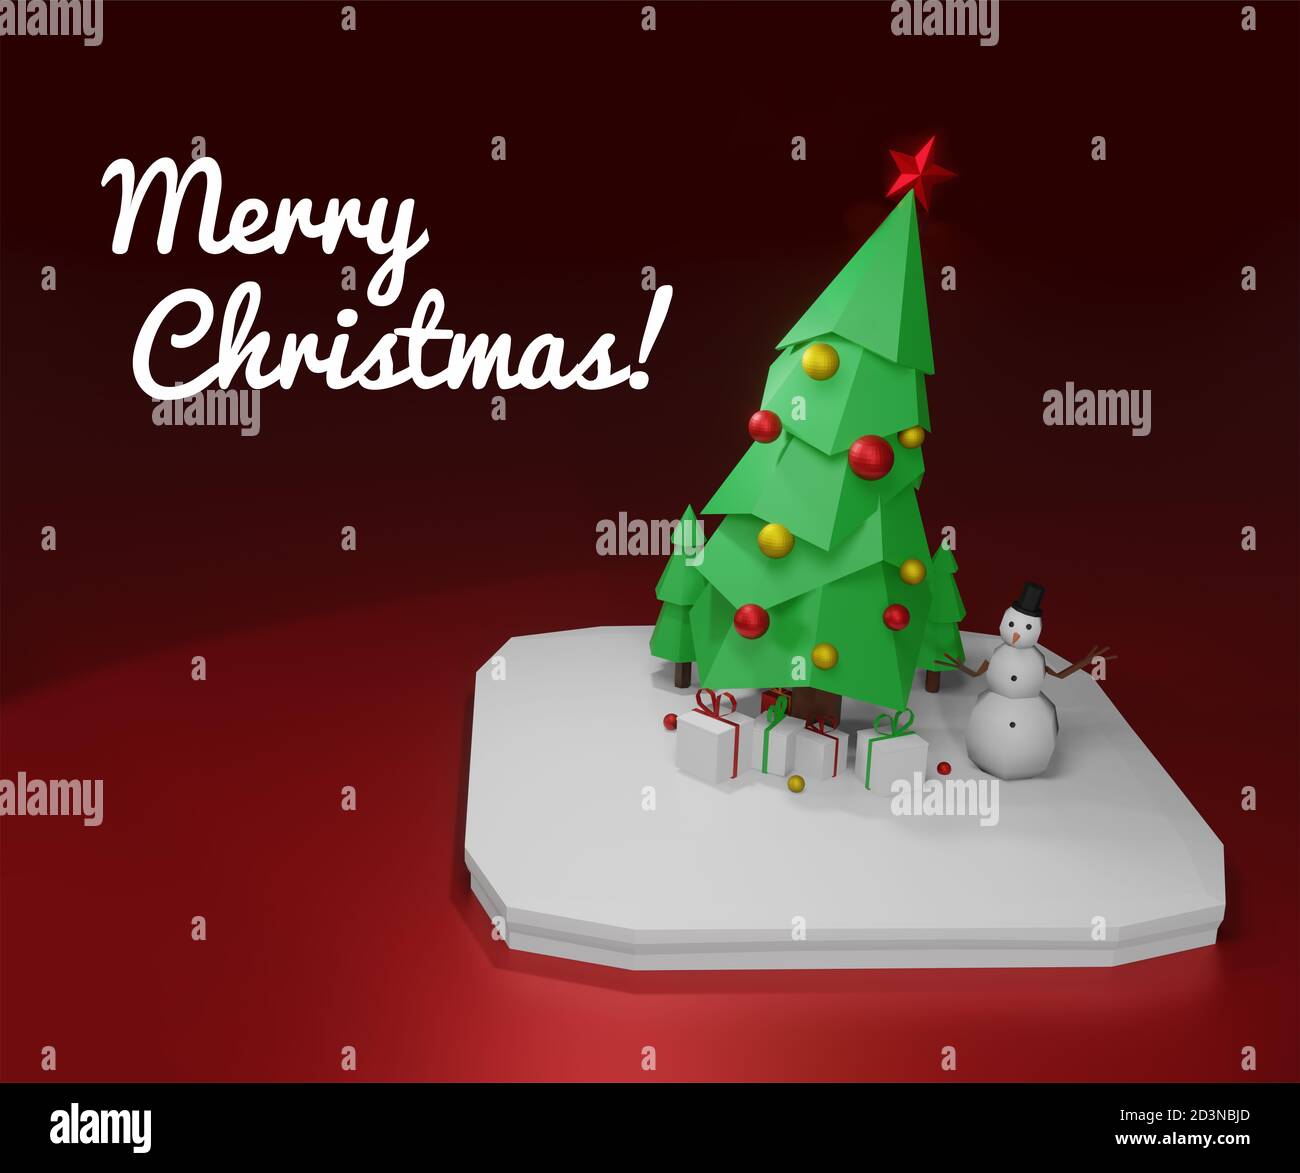 Christmas tree in ice cube 3d render Stock Photo - Alamy